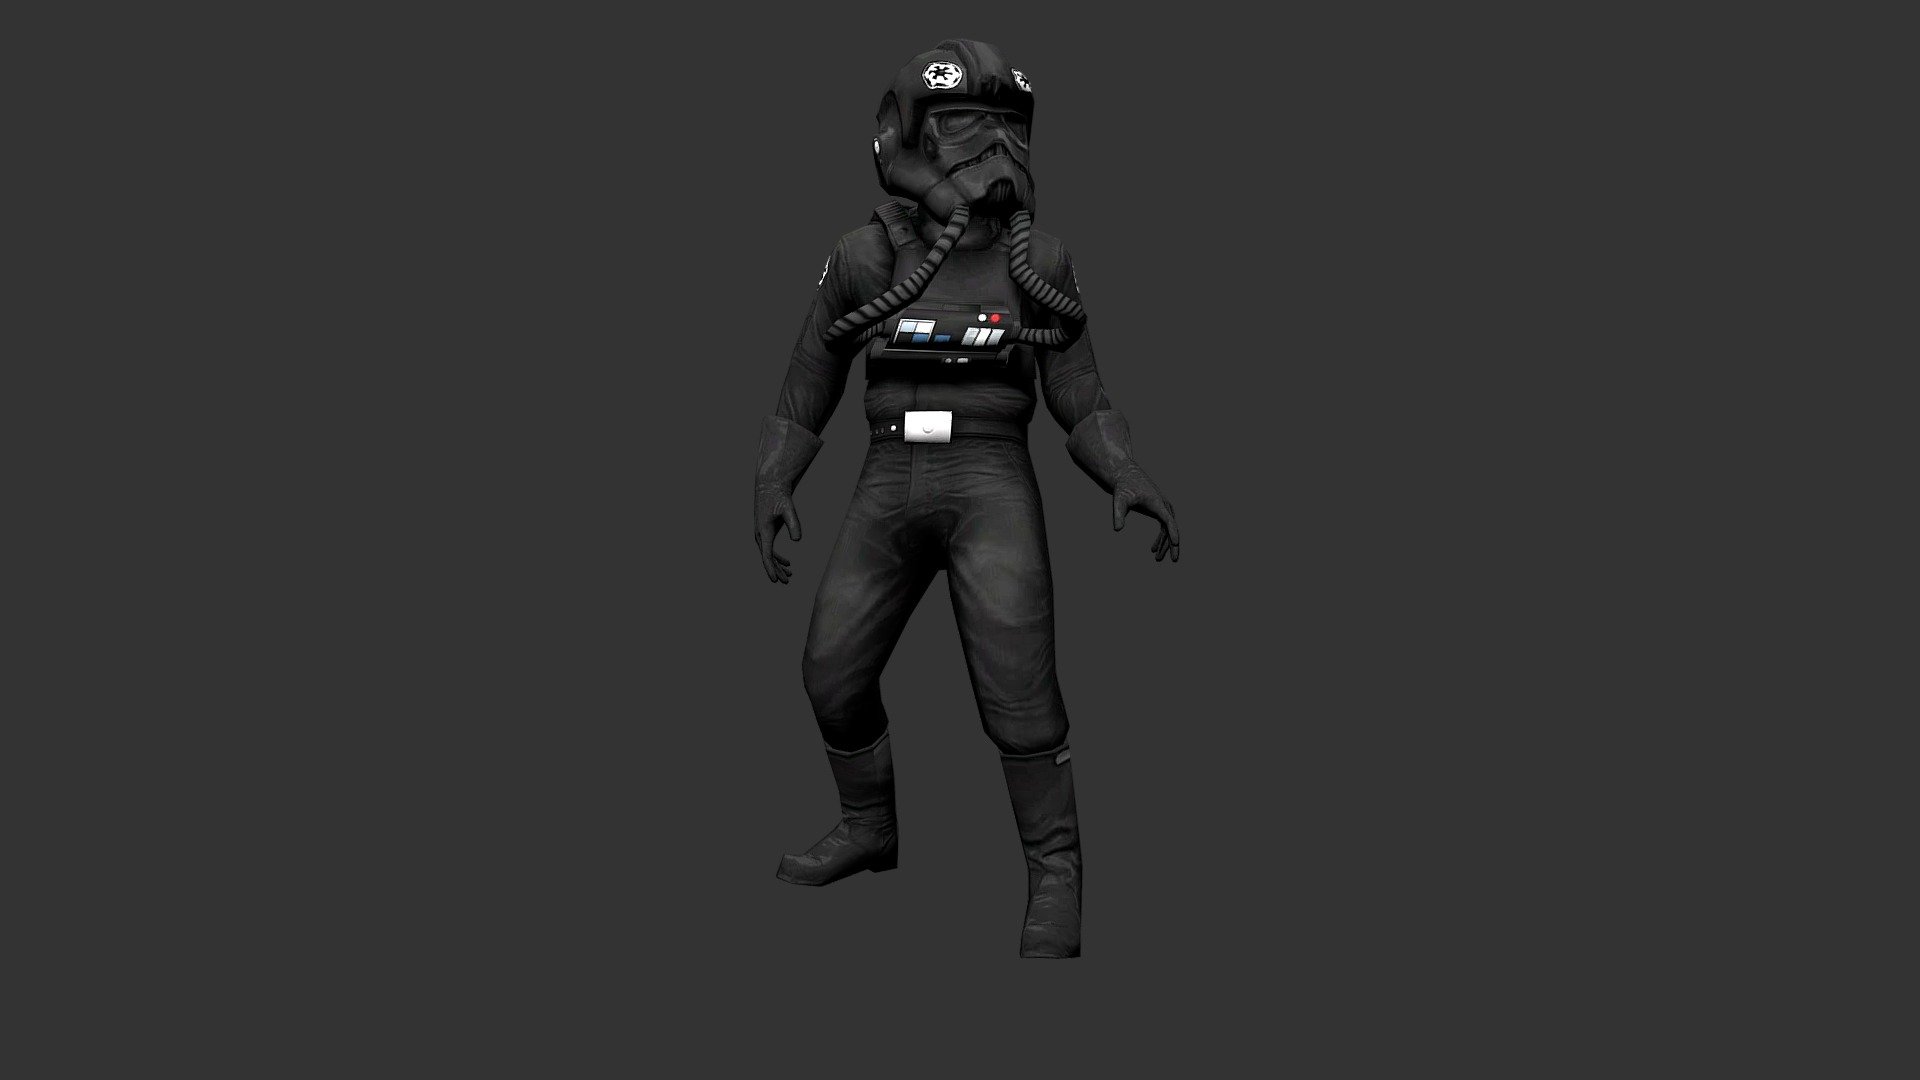 TIE Pilot model by Mind Mulch for The Masses [06e240a]